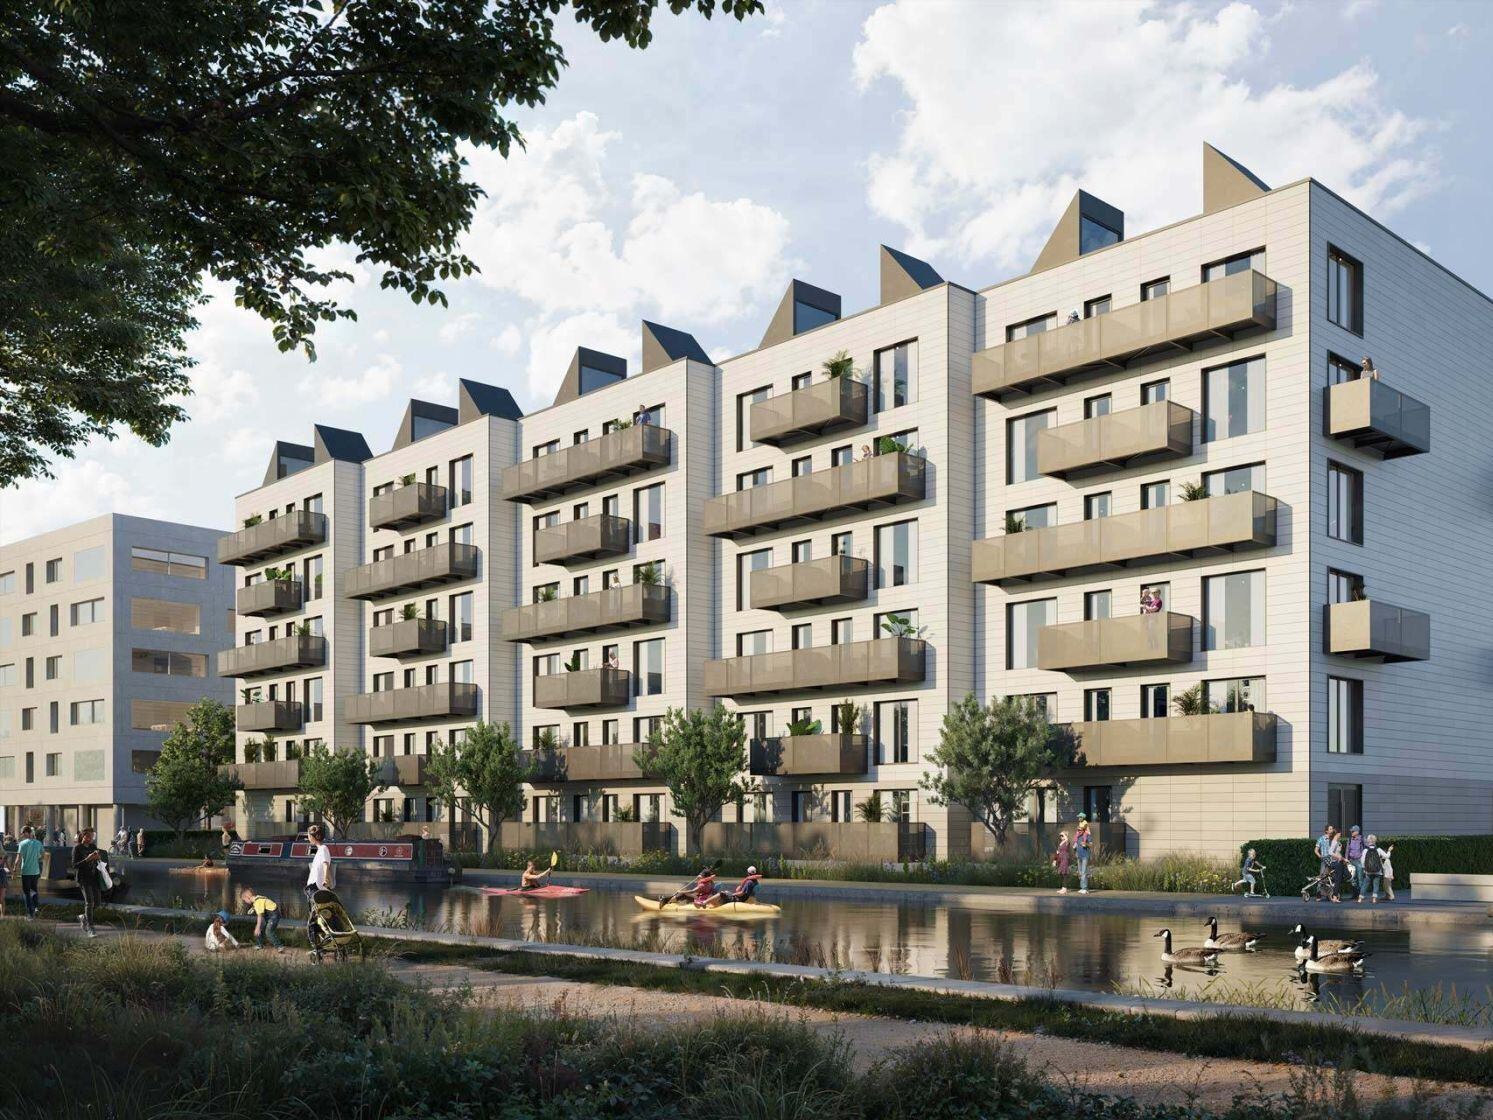 New homes set to launch at canalside site